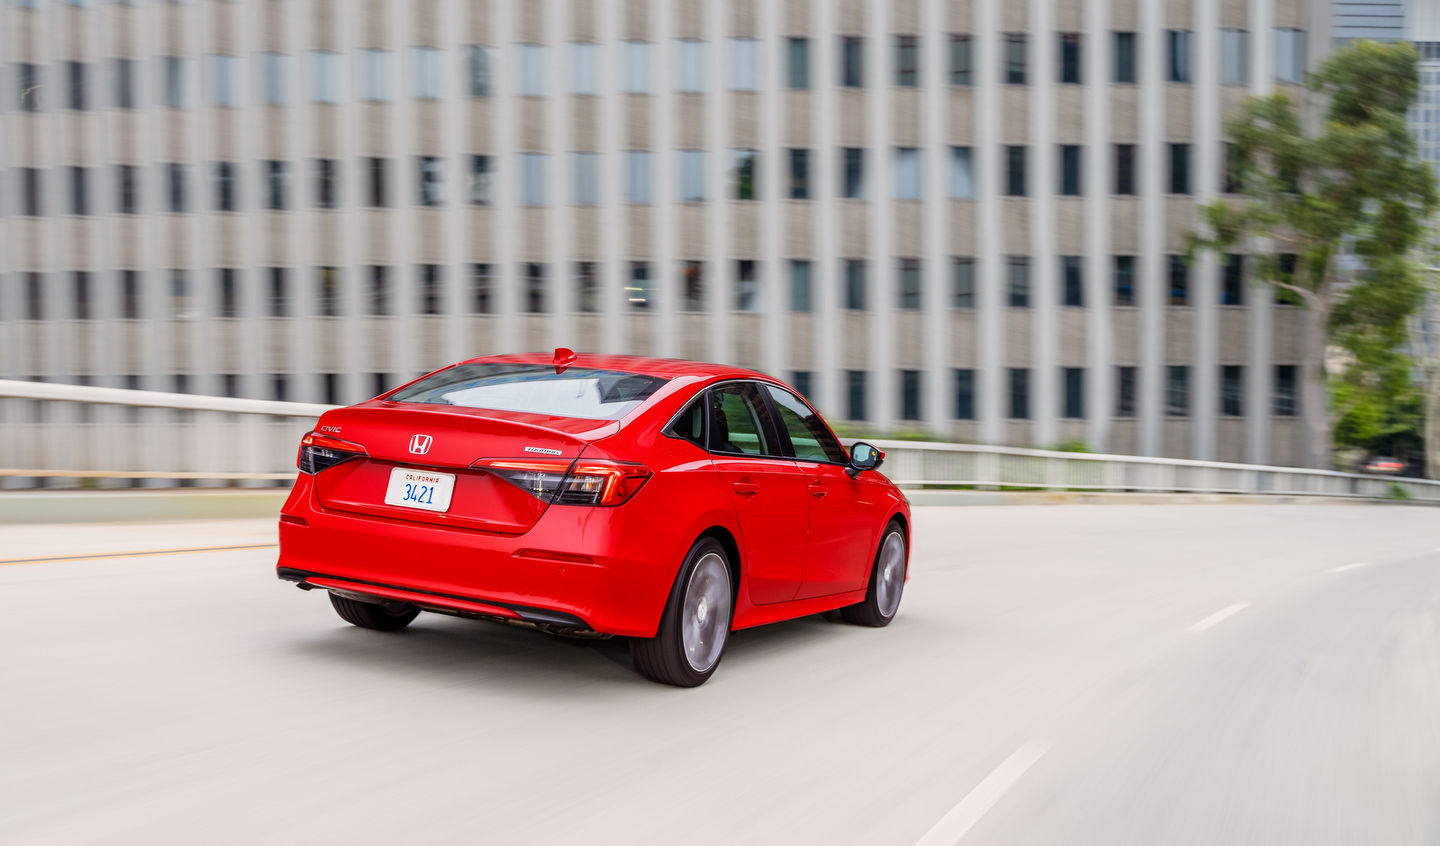 Three elements that set the 2022 Honda Civic apart from the Volkswagen Jetta